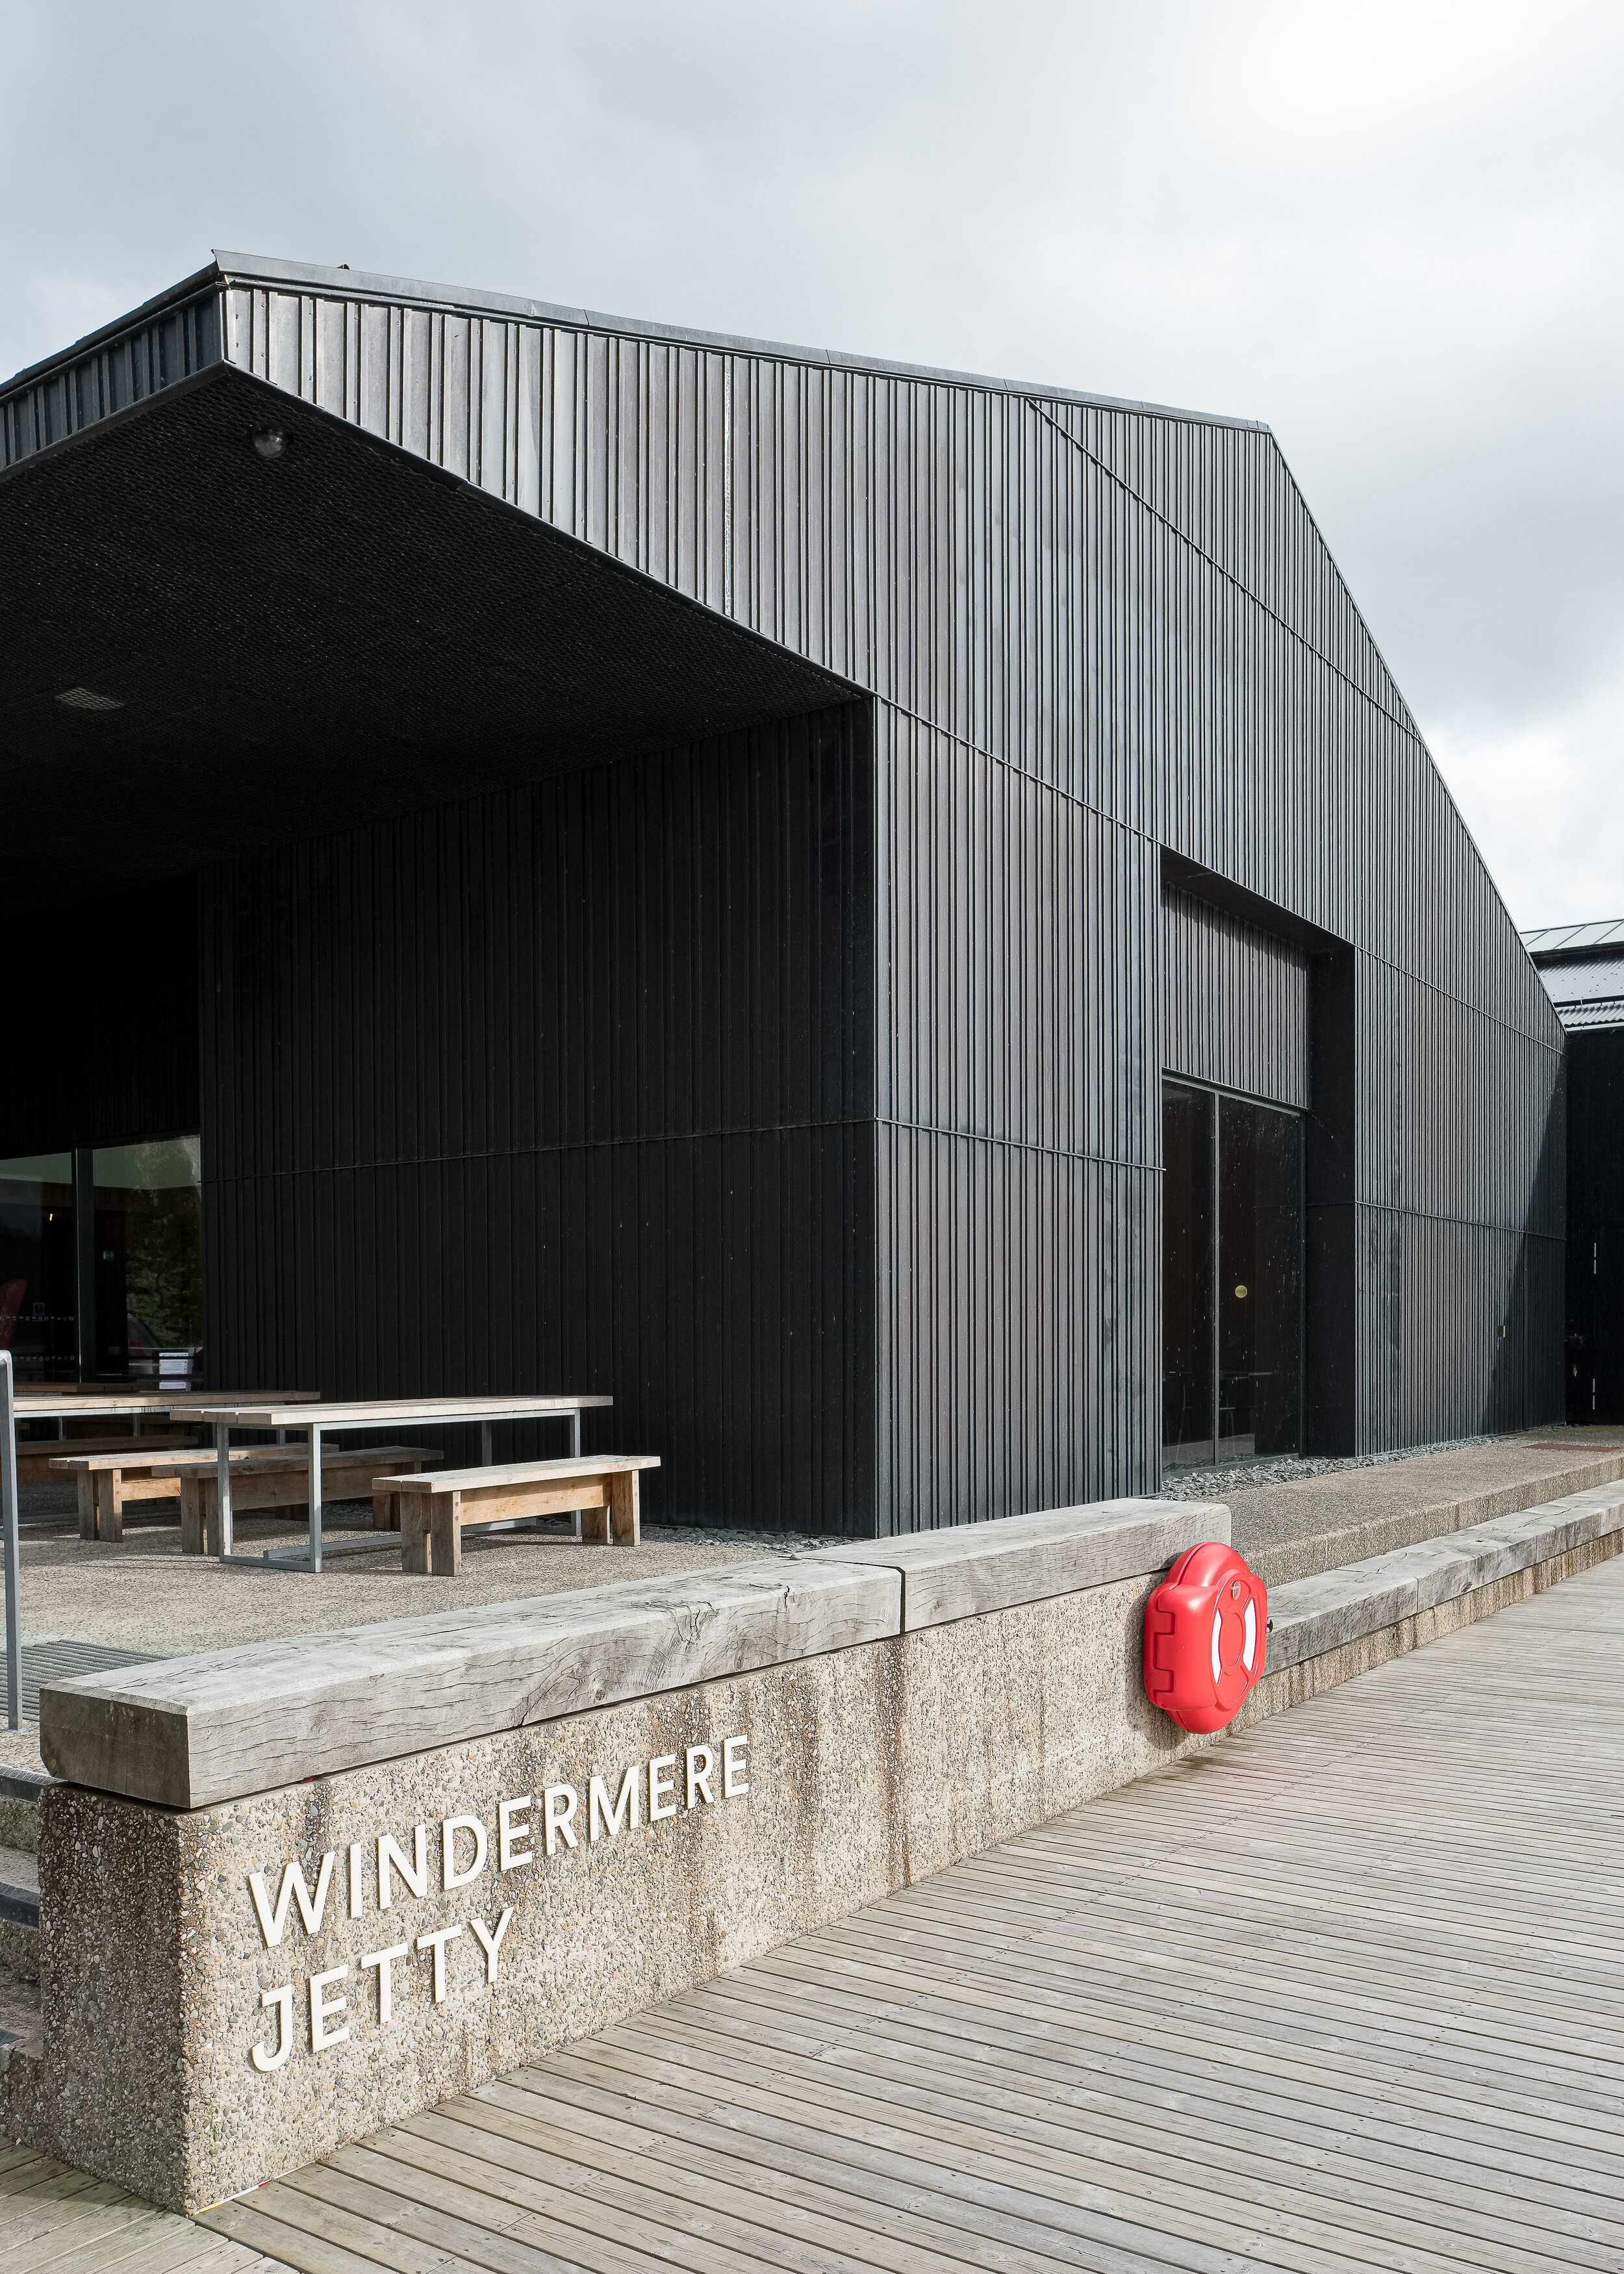 Fred+Howarth+Photography_Winderemere+Jetty+Museum_09.jpg